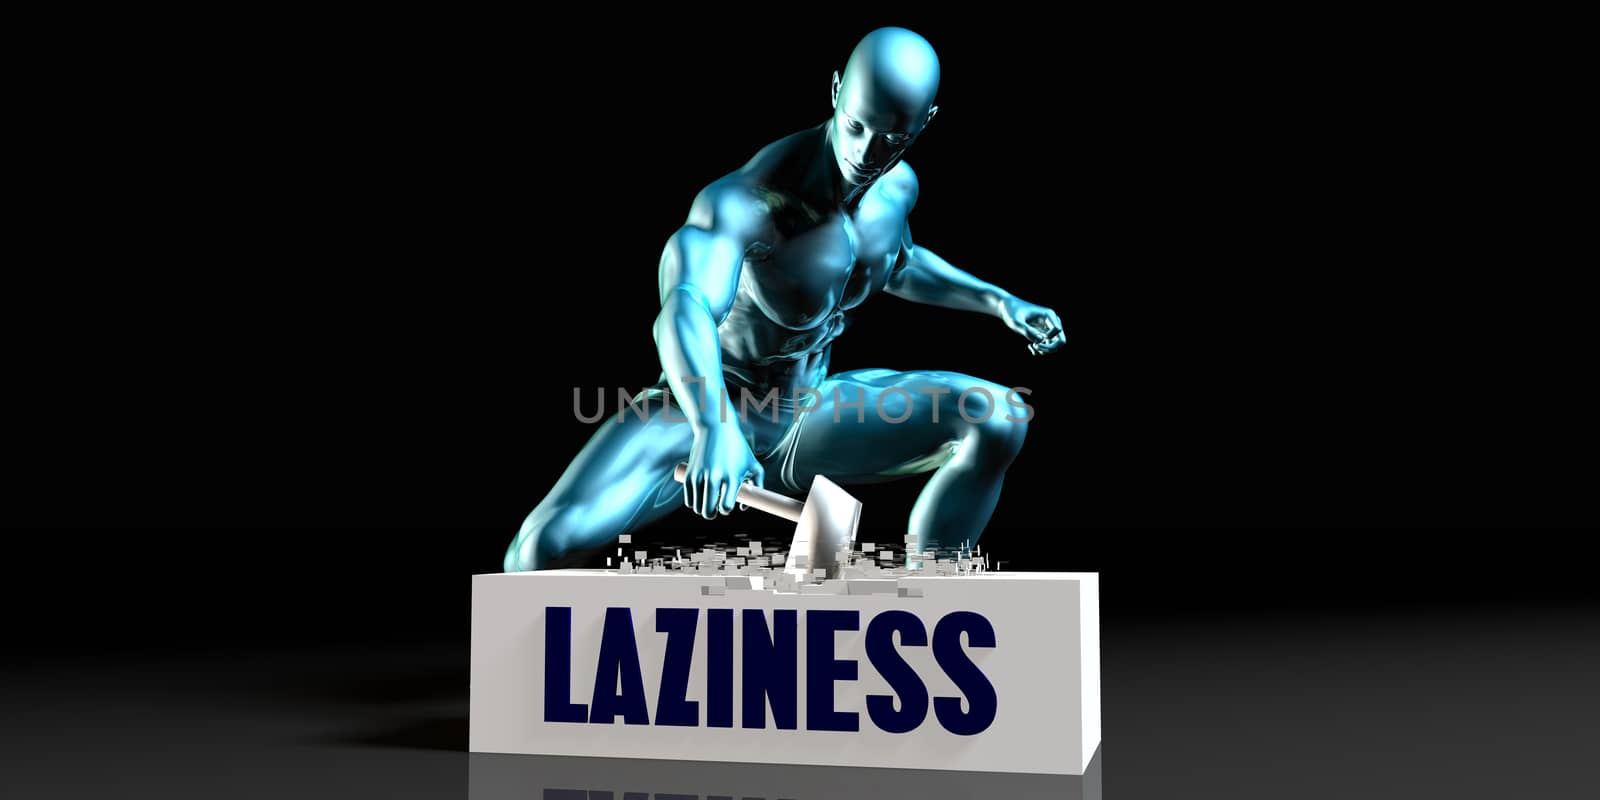 Get Rid of Laziness and Remove the Problem